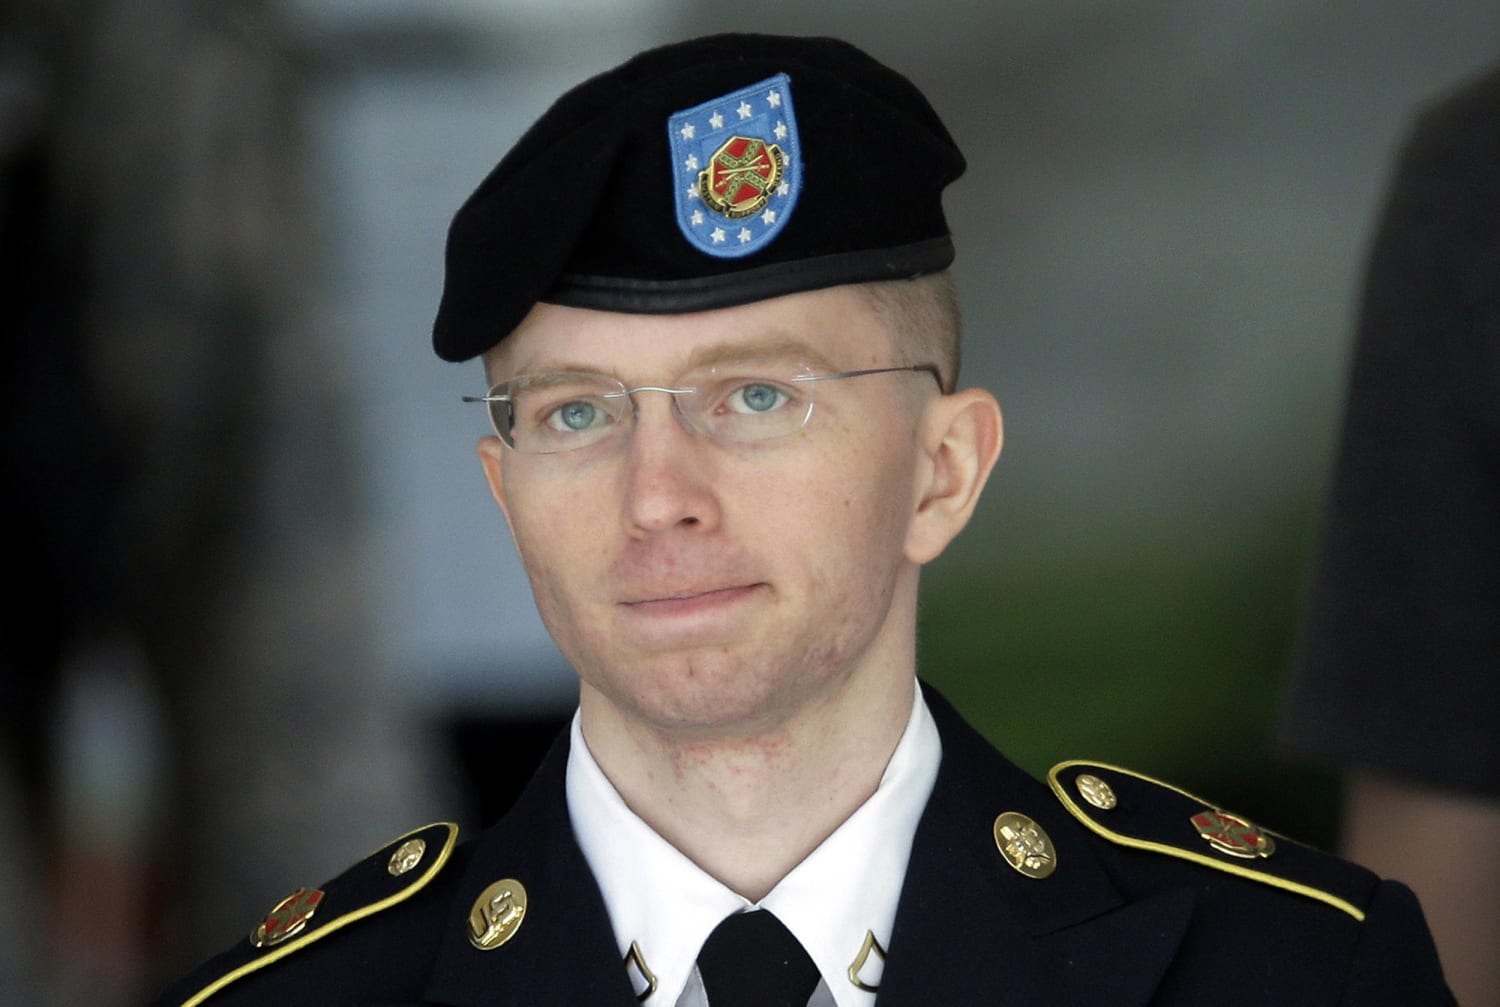 Army Approves Hormone Therapy Treatment for Wikileaker Chelsea Manning - 140416-bradley-chelsea-manning-1303_f9e0452eac40b77f0dc21b6b629030dc